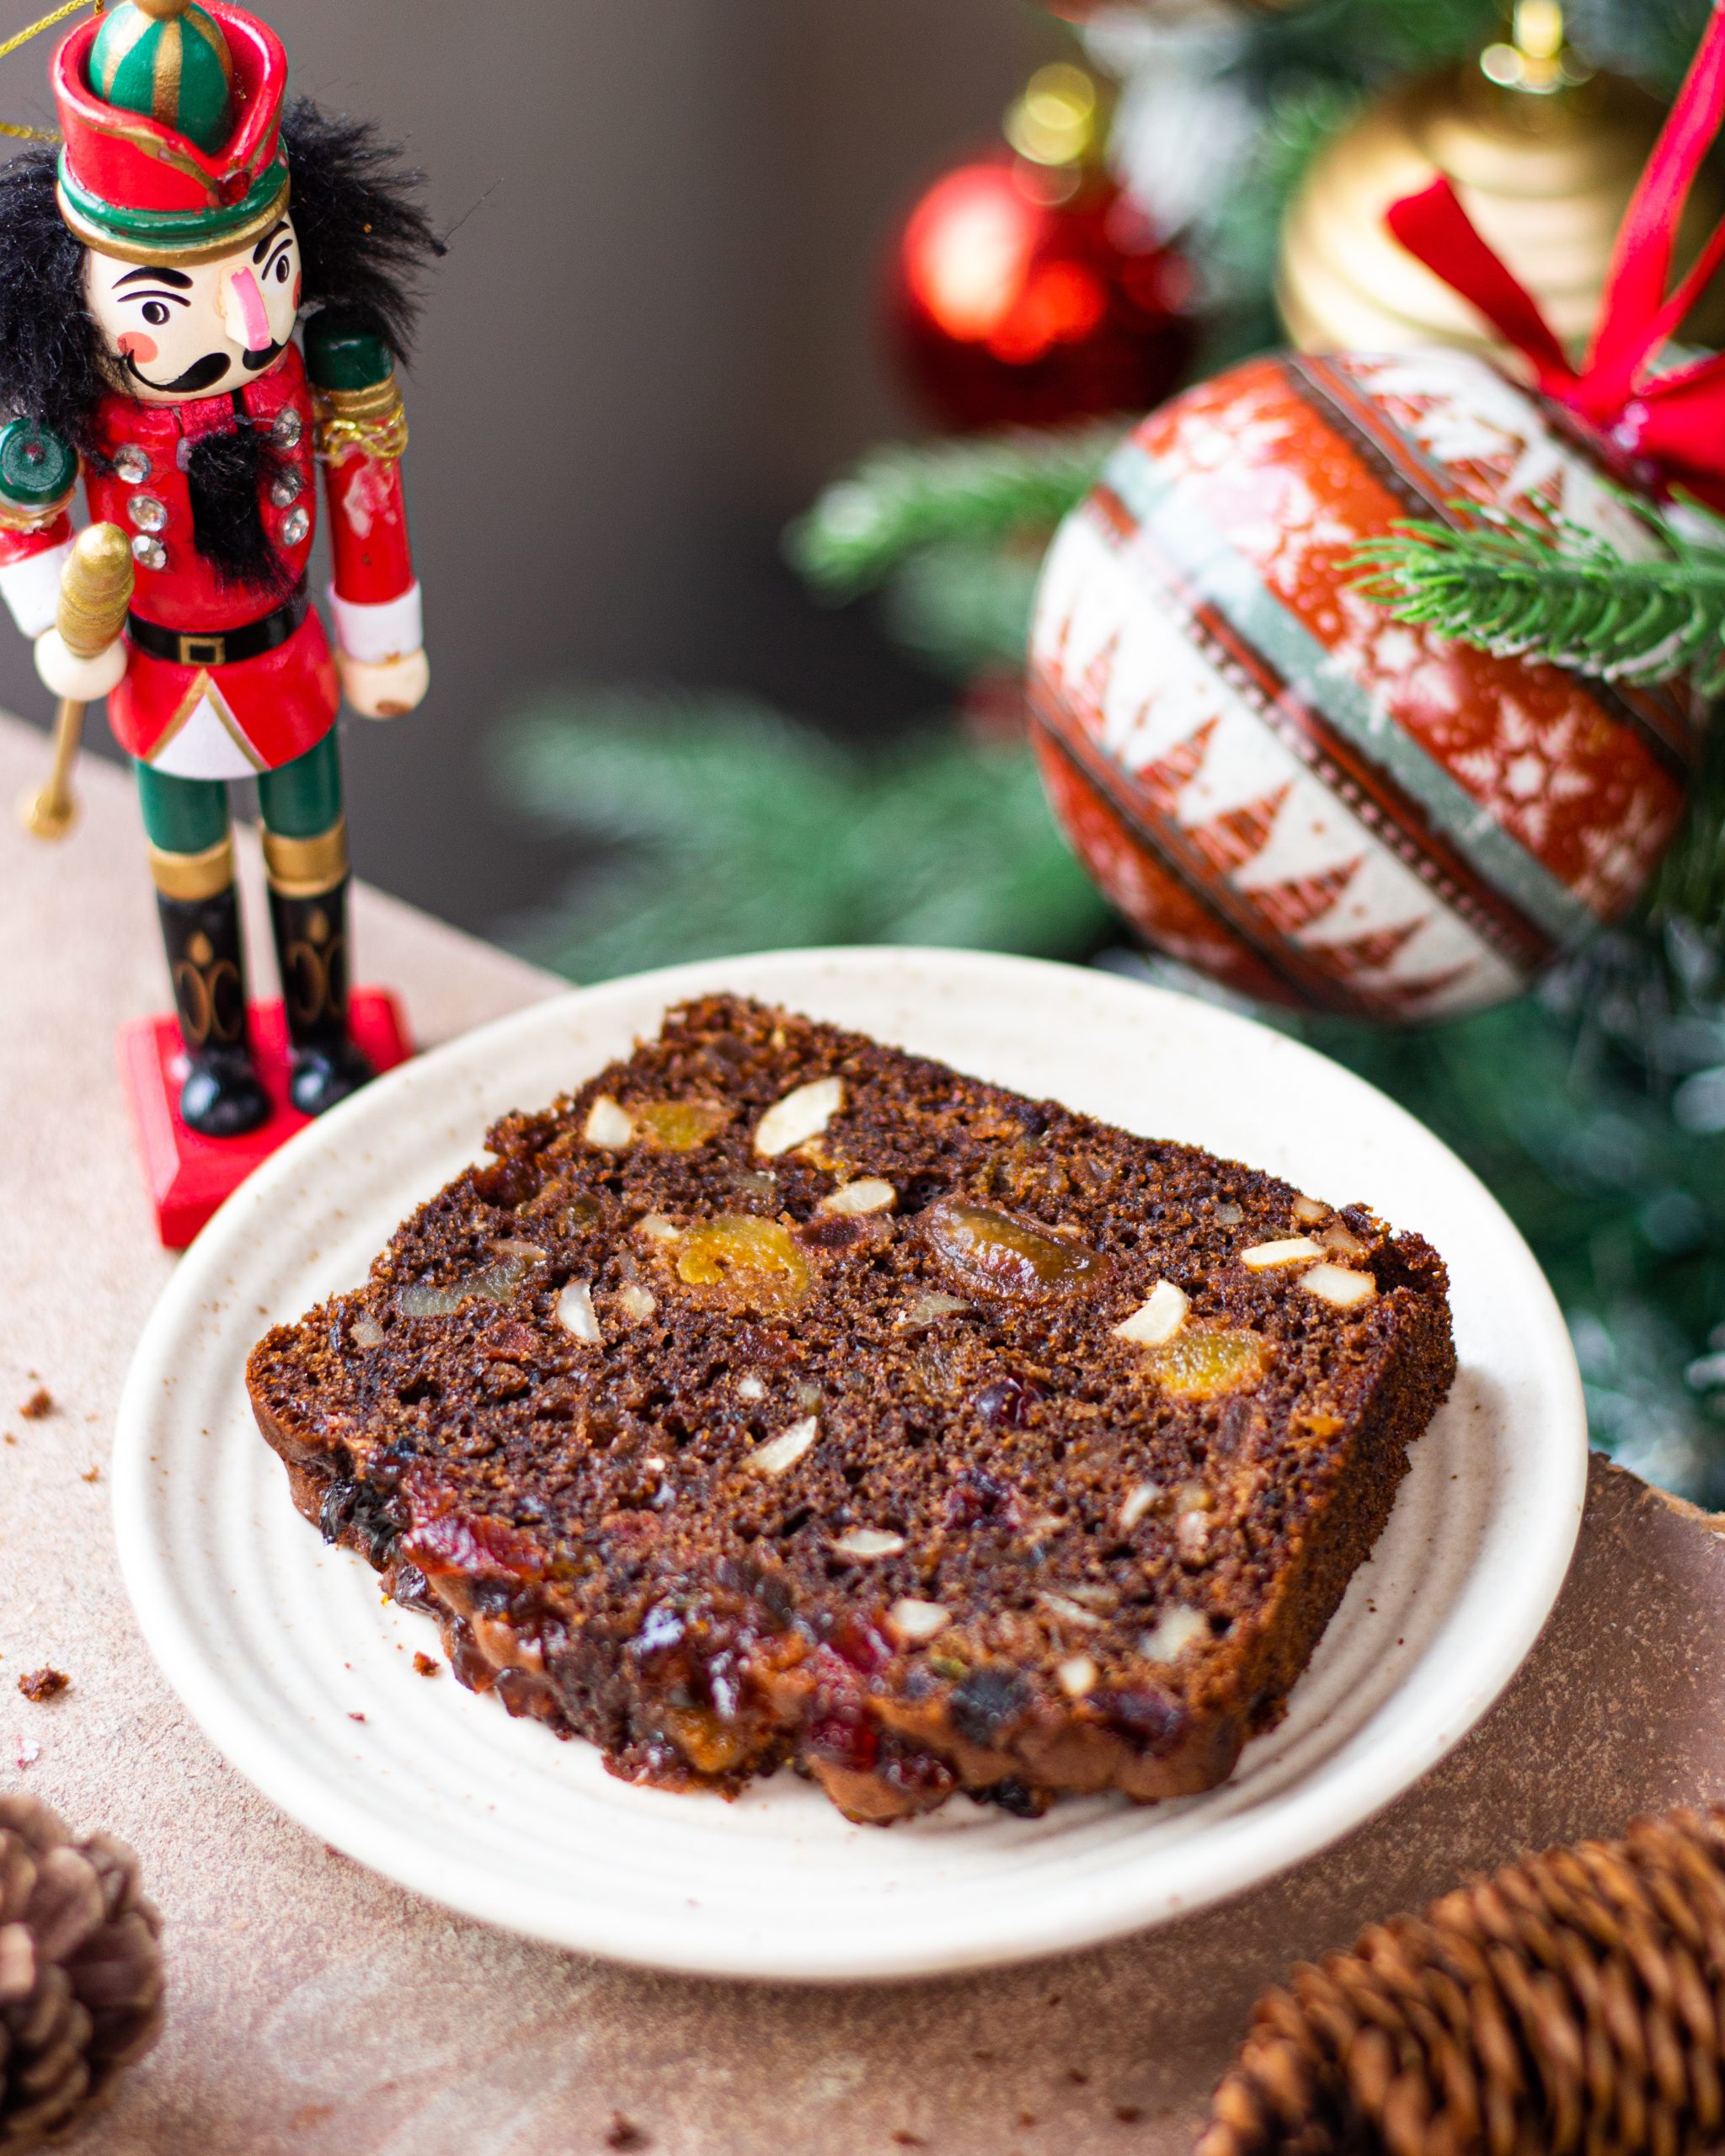 Chocolate Fruit & Nut Cake - Christmas Special - Bake with Shivesh